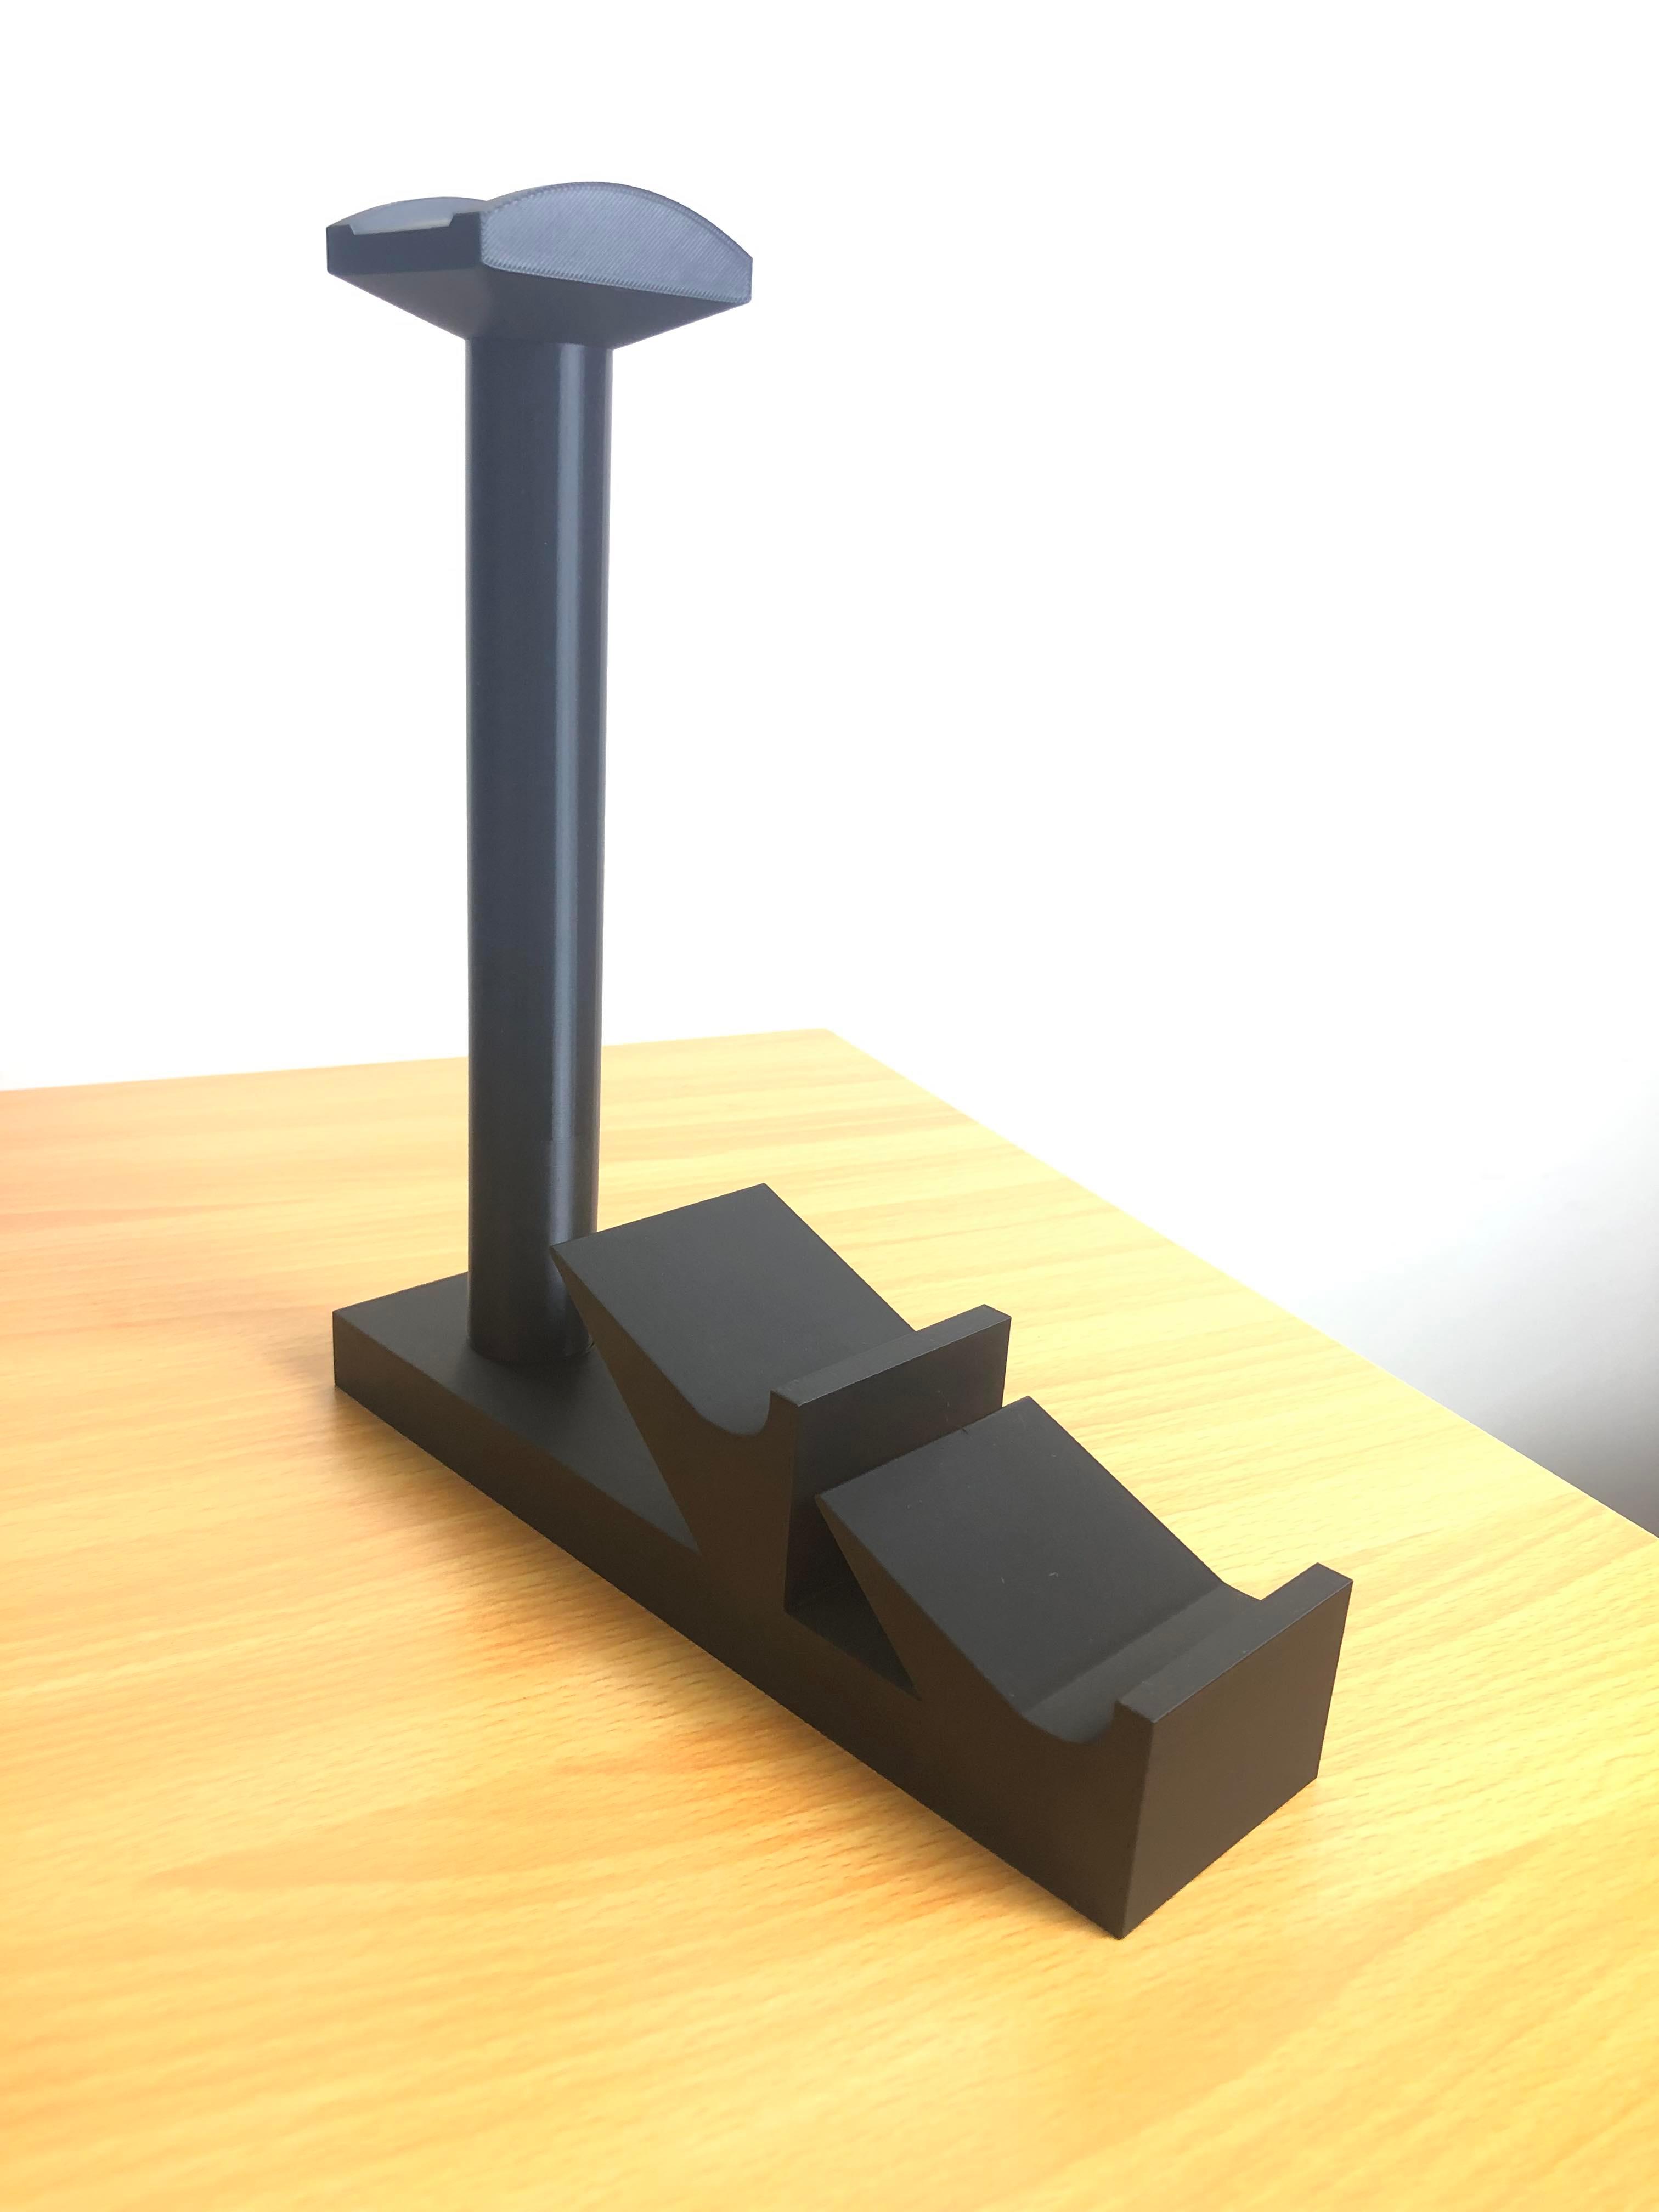 Headset and (2) Controller Stand  3d model